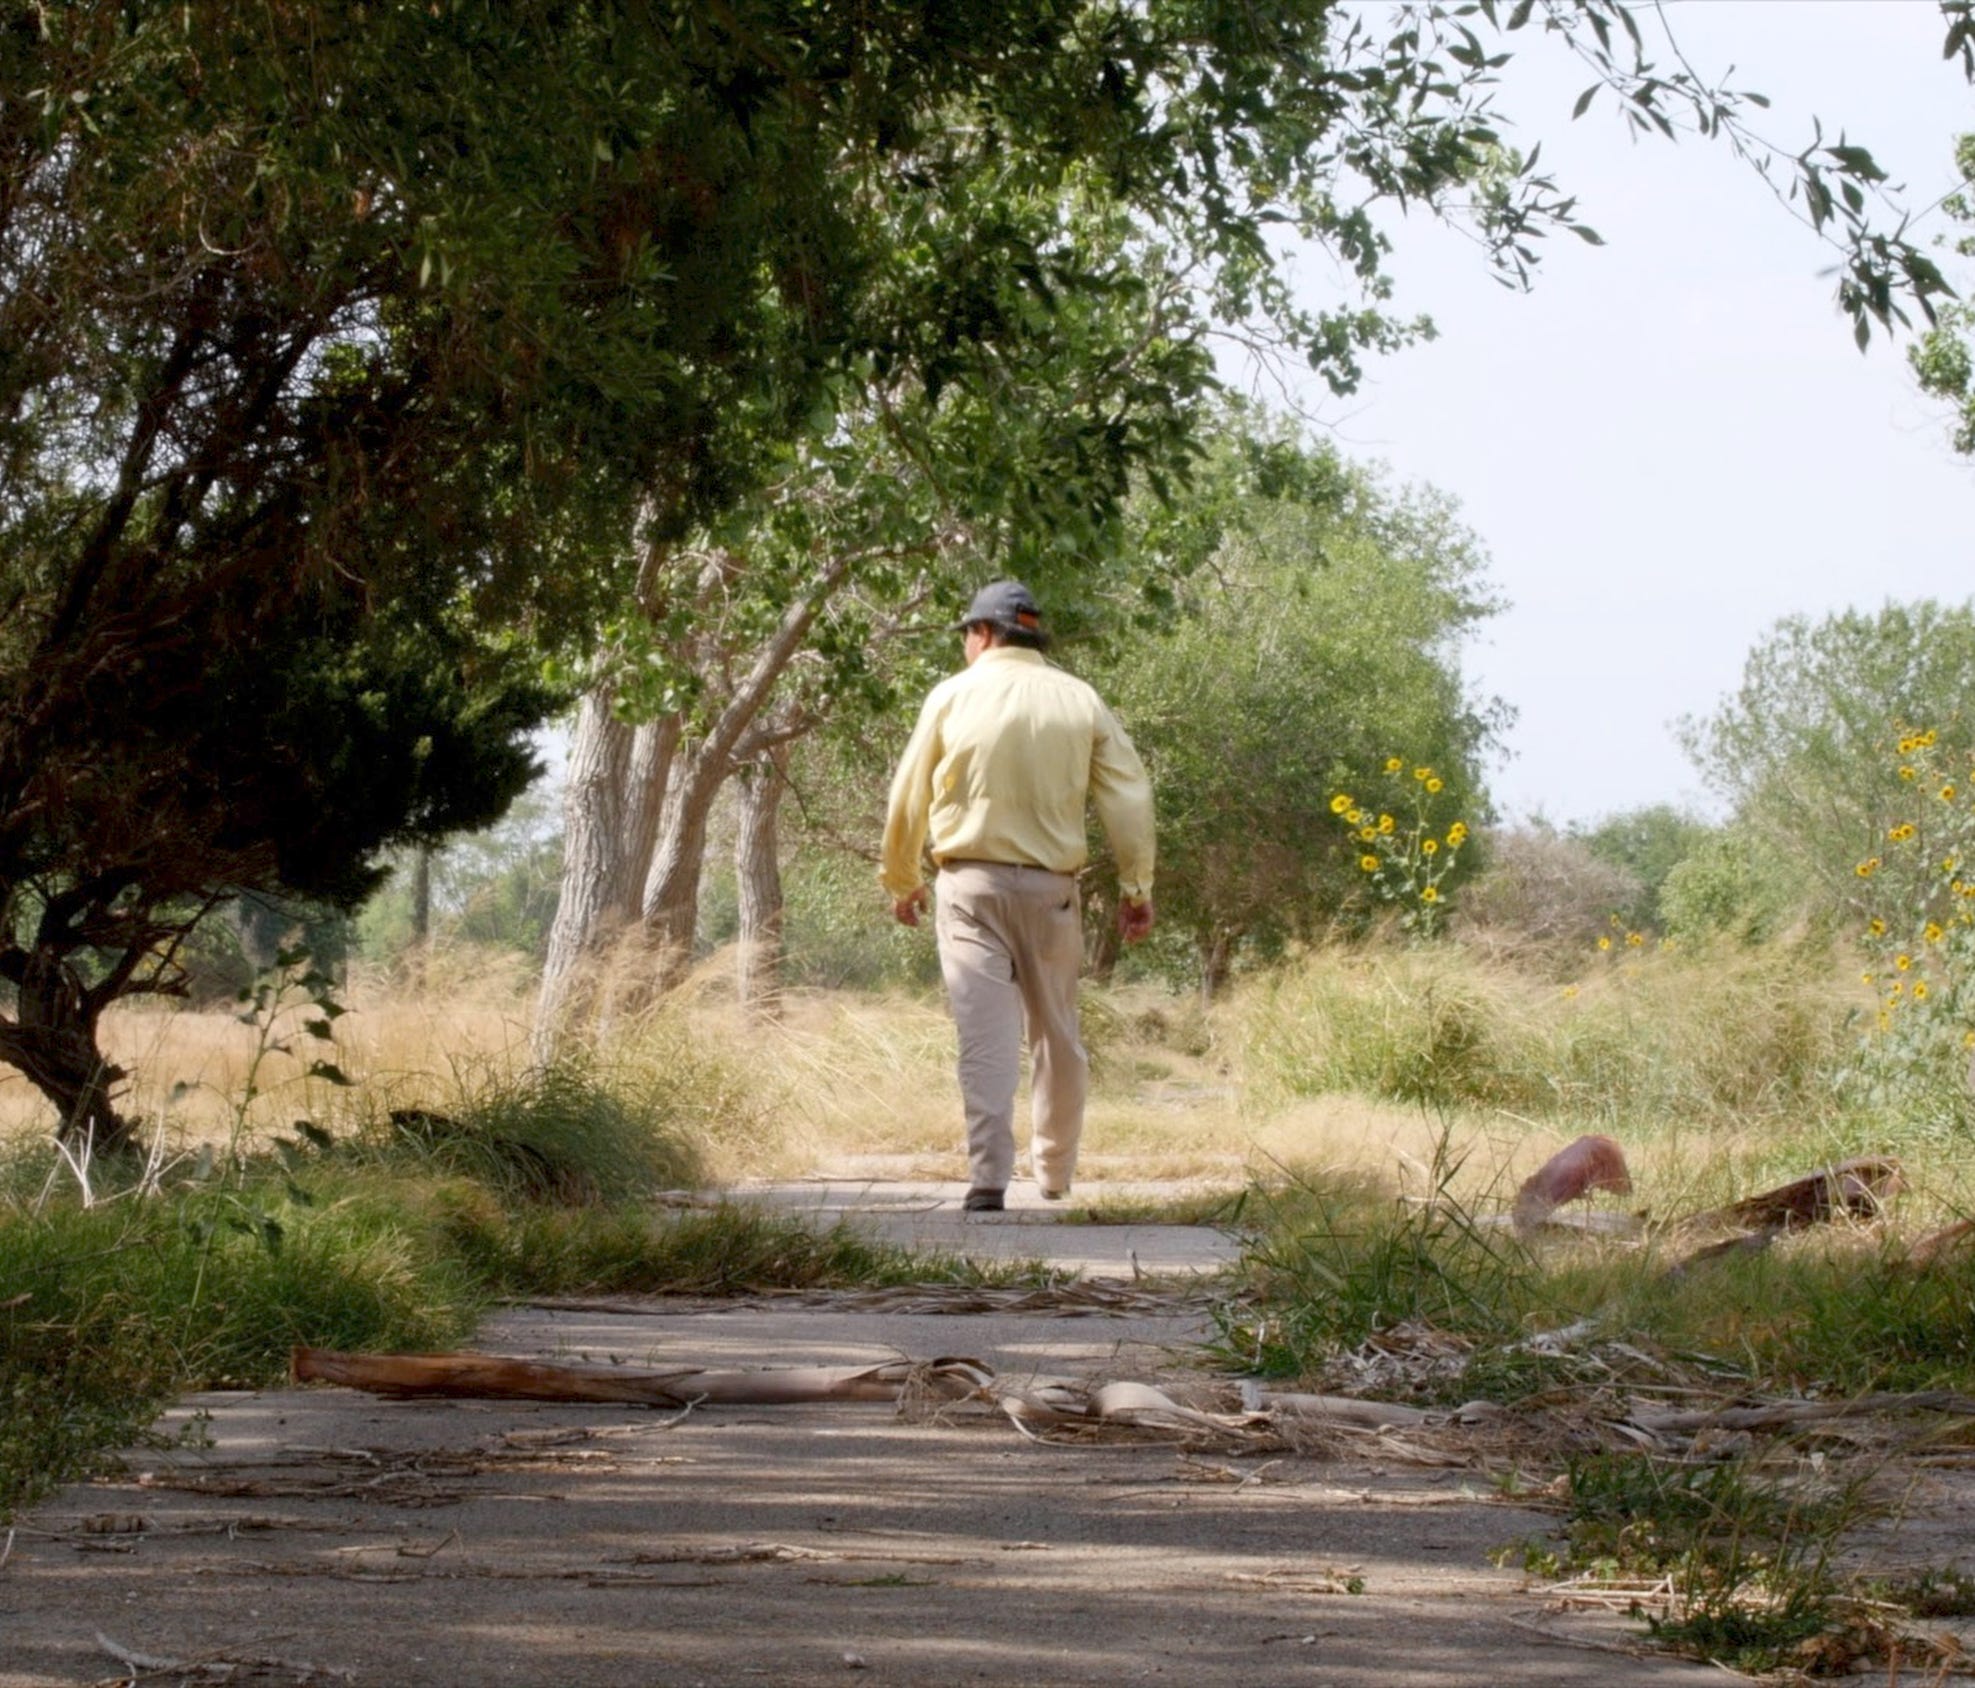 Bob Lucio, former owner of the Fort Brown Memorial Golf Course, walks along a cart path that is being covered by vegetation since the course close in 2015.